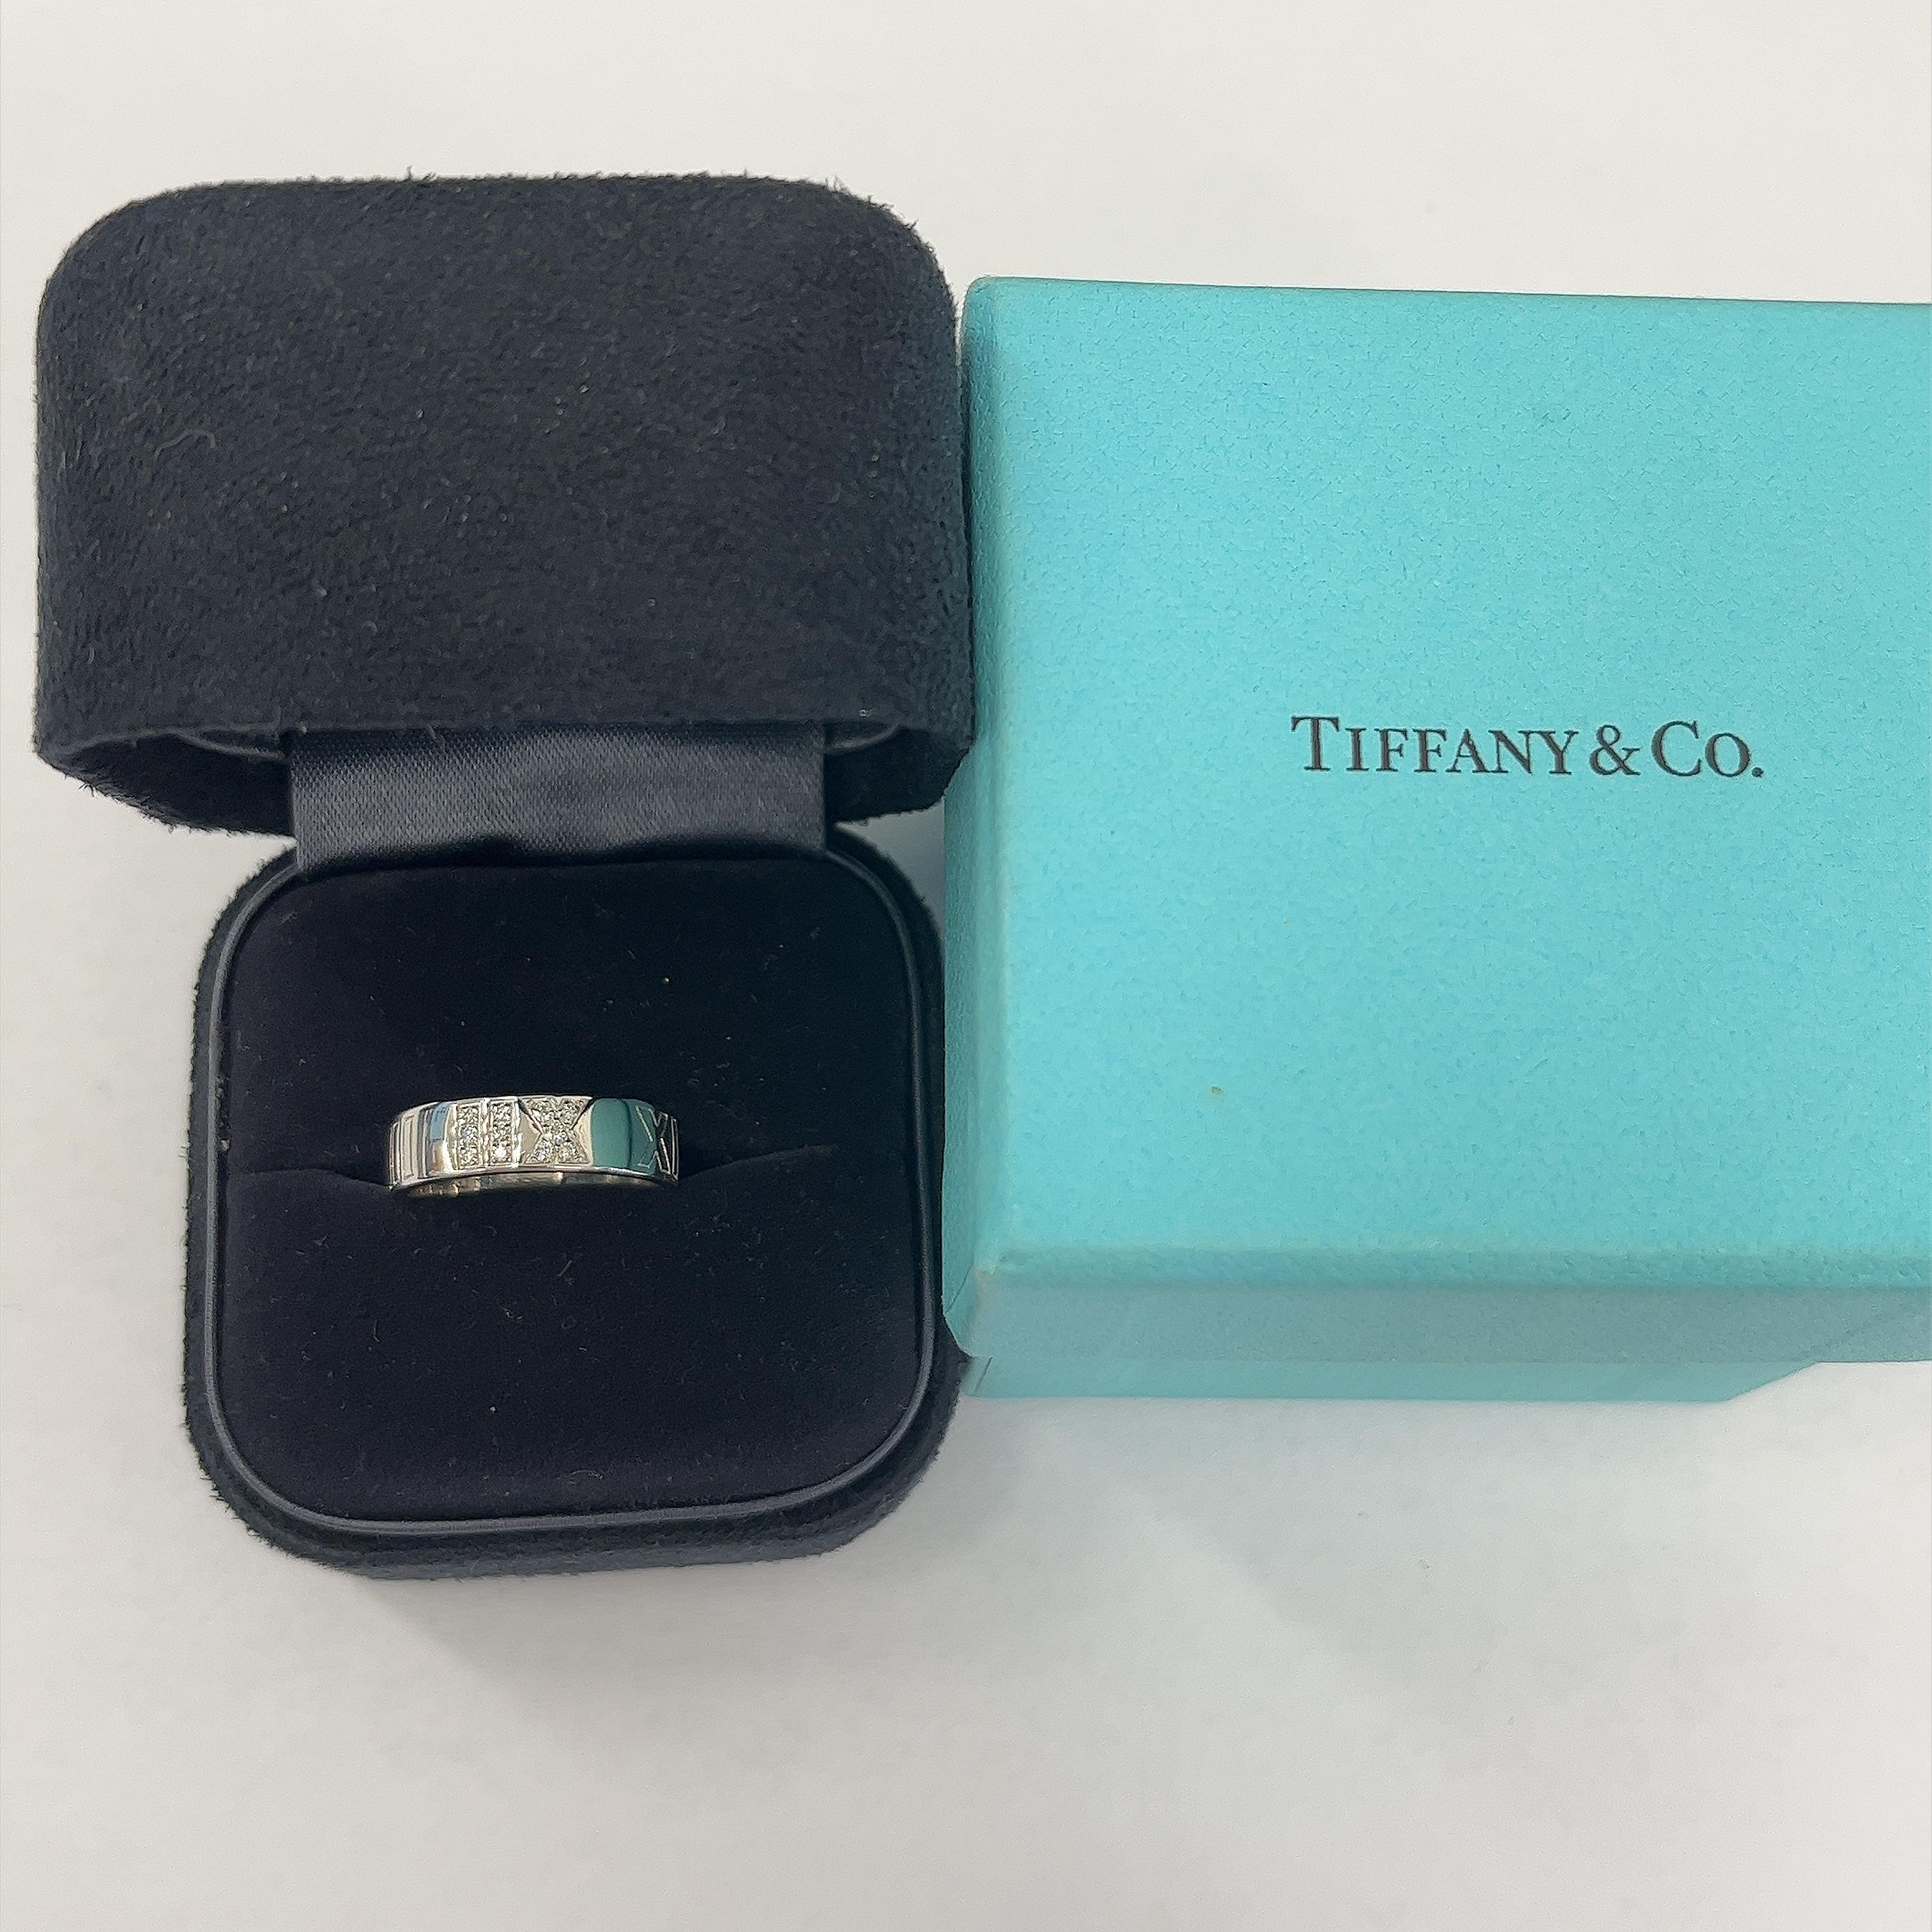 Tiffany & Co. Atlas Diamond Band Ring set in 18ct White Gold For Sale 2